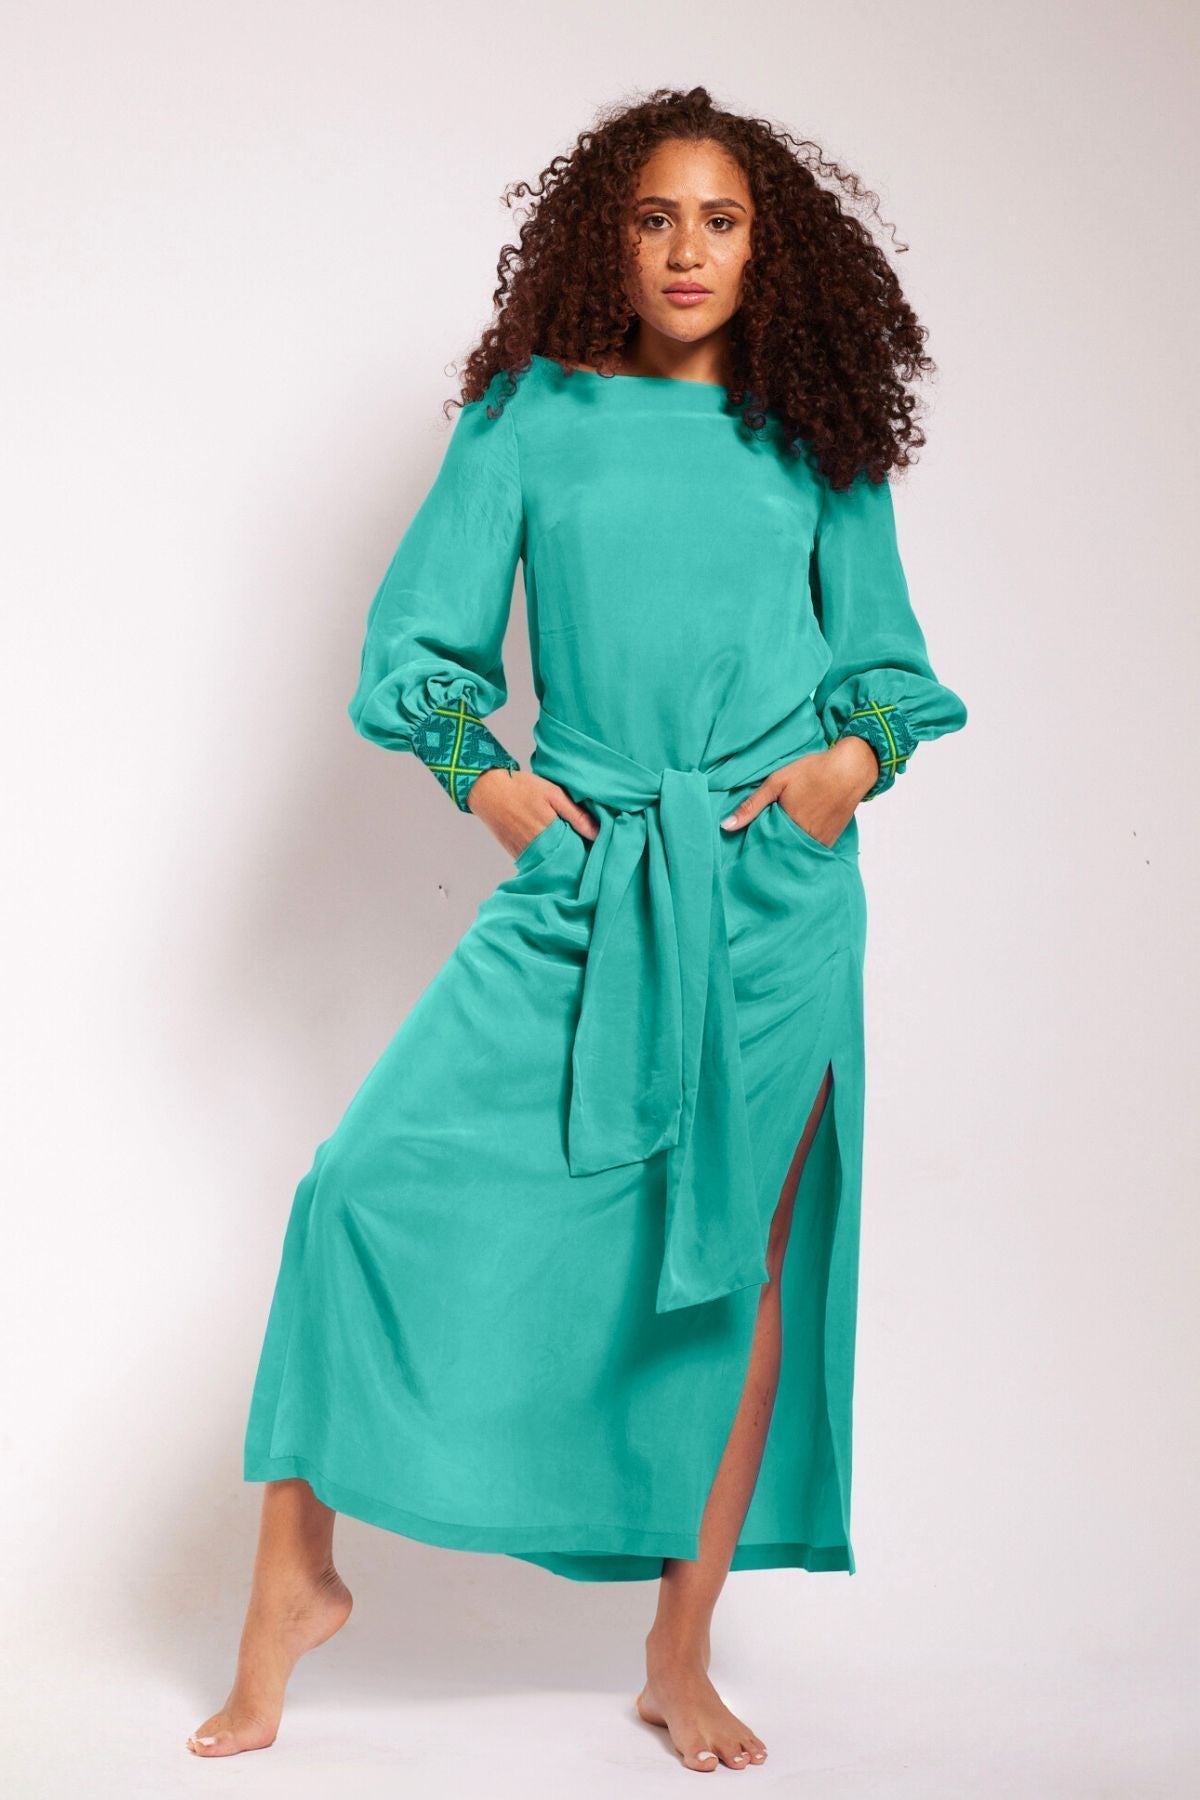 front view of woman wearing turquoise kaftan duster with embroidered sleeves made from recycled materials